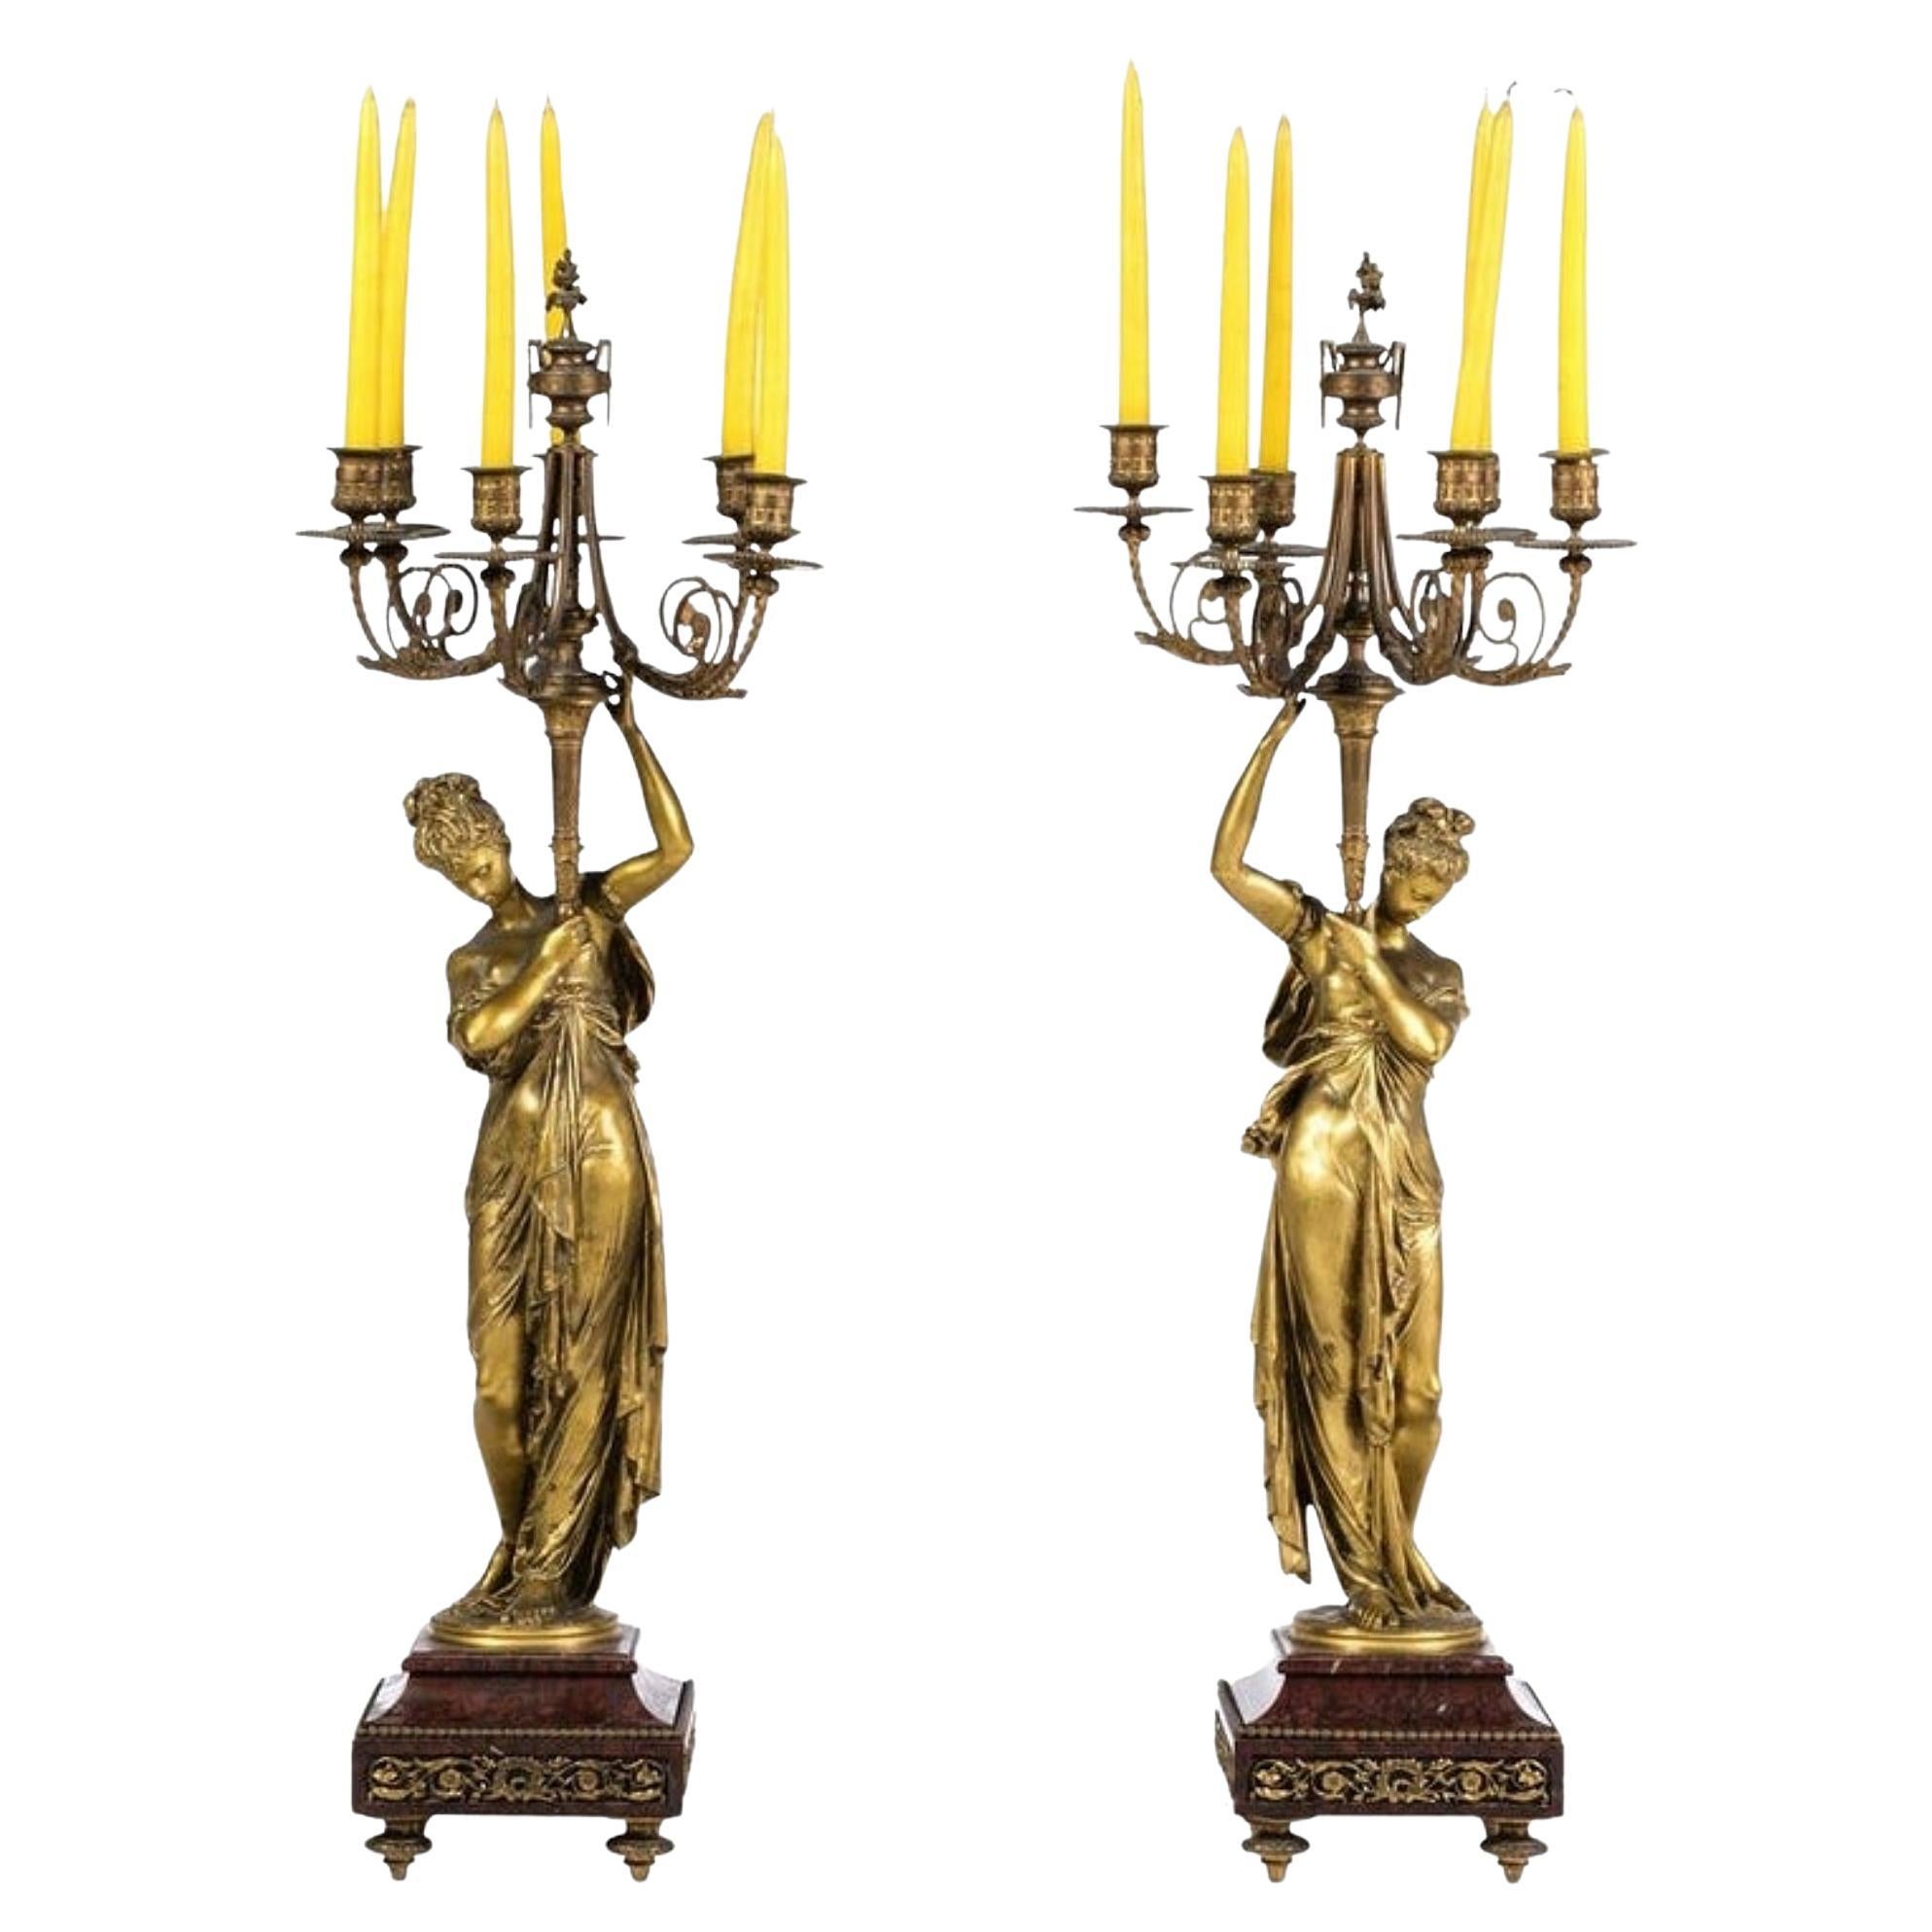 Albert Carrier-Belleuse Pair of French Five-Fire Candelabra, 19th Century For Sale